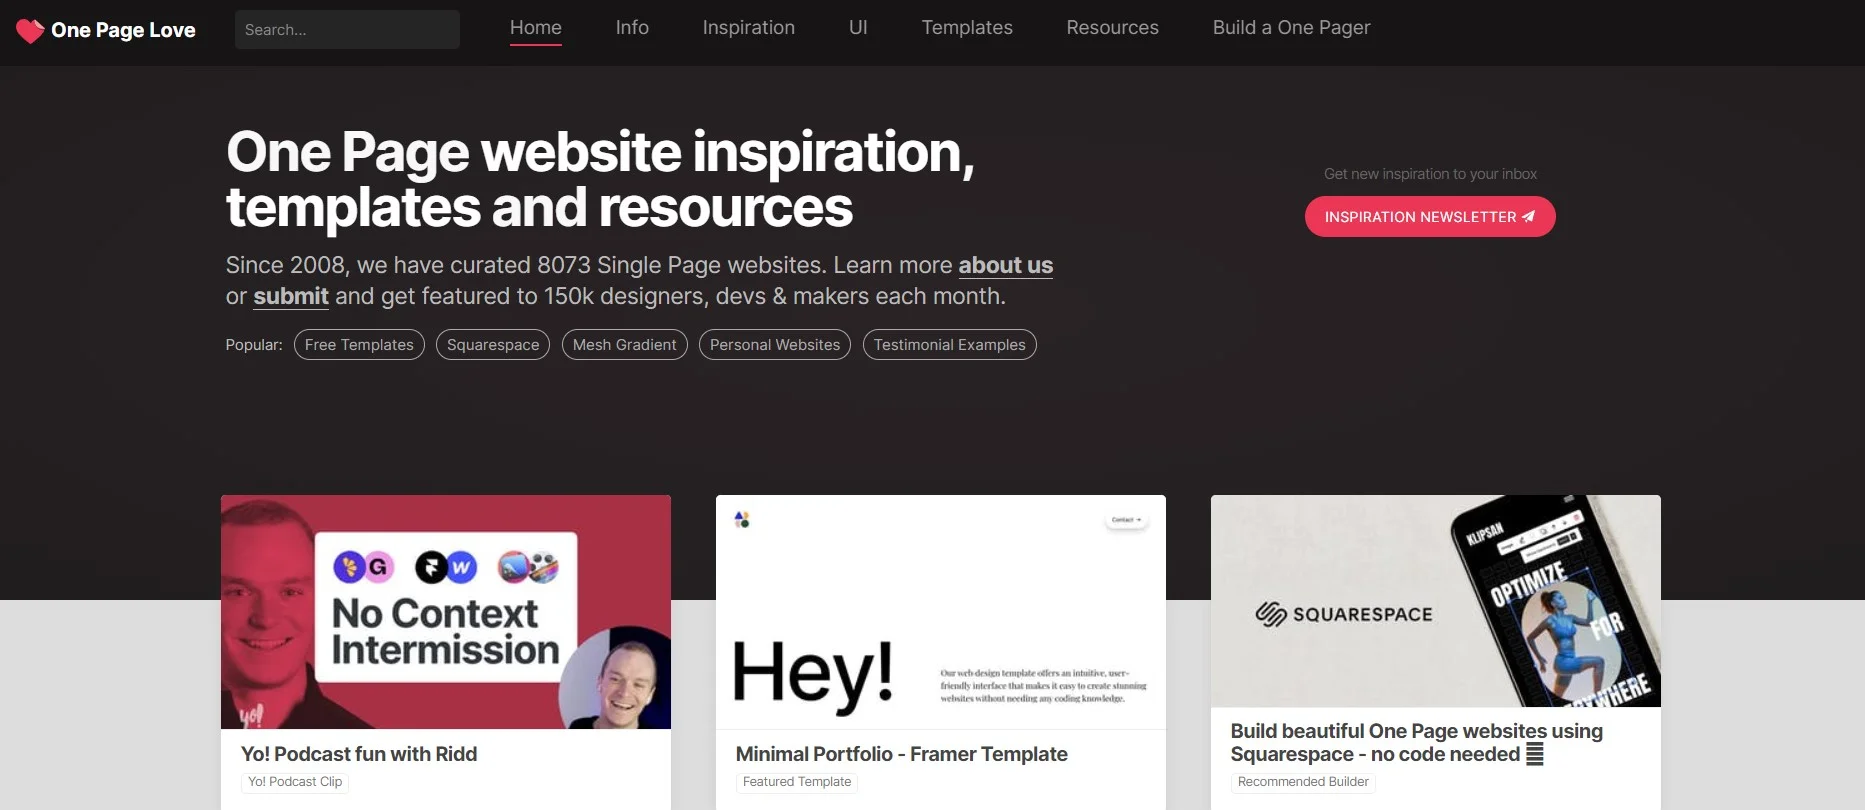 One page love UX and UI design inspiration site